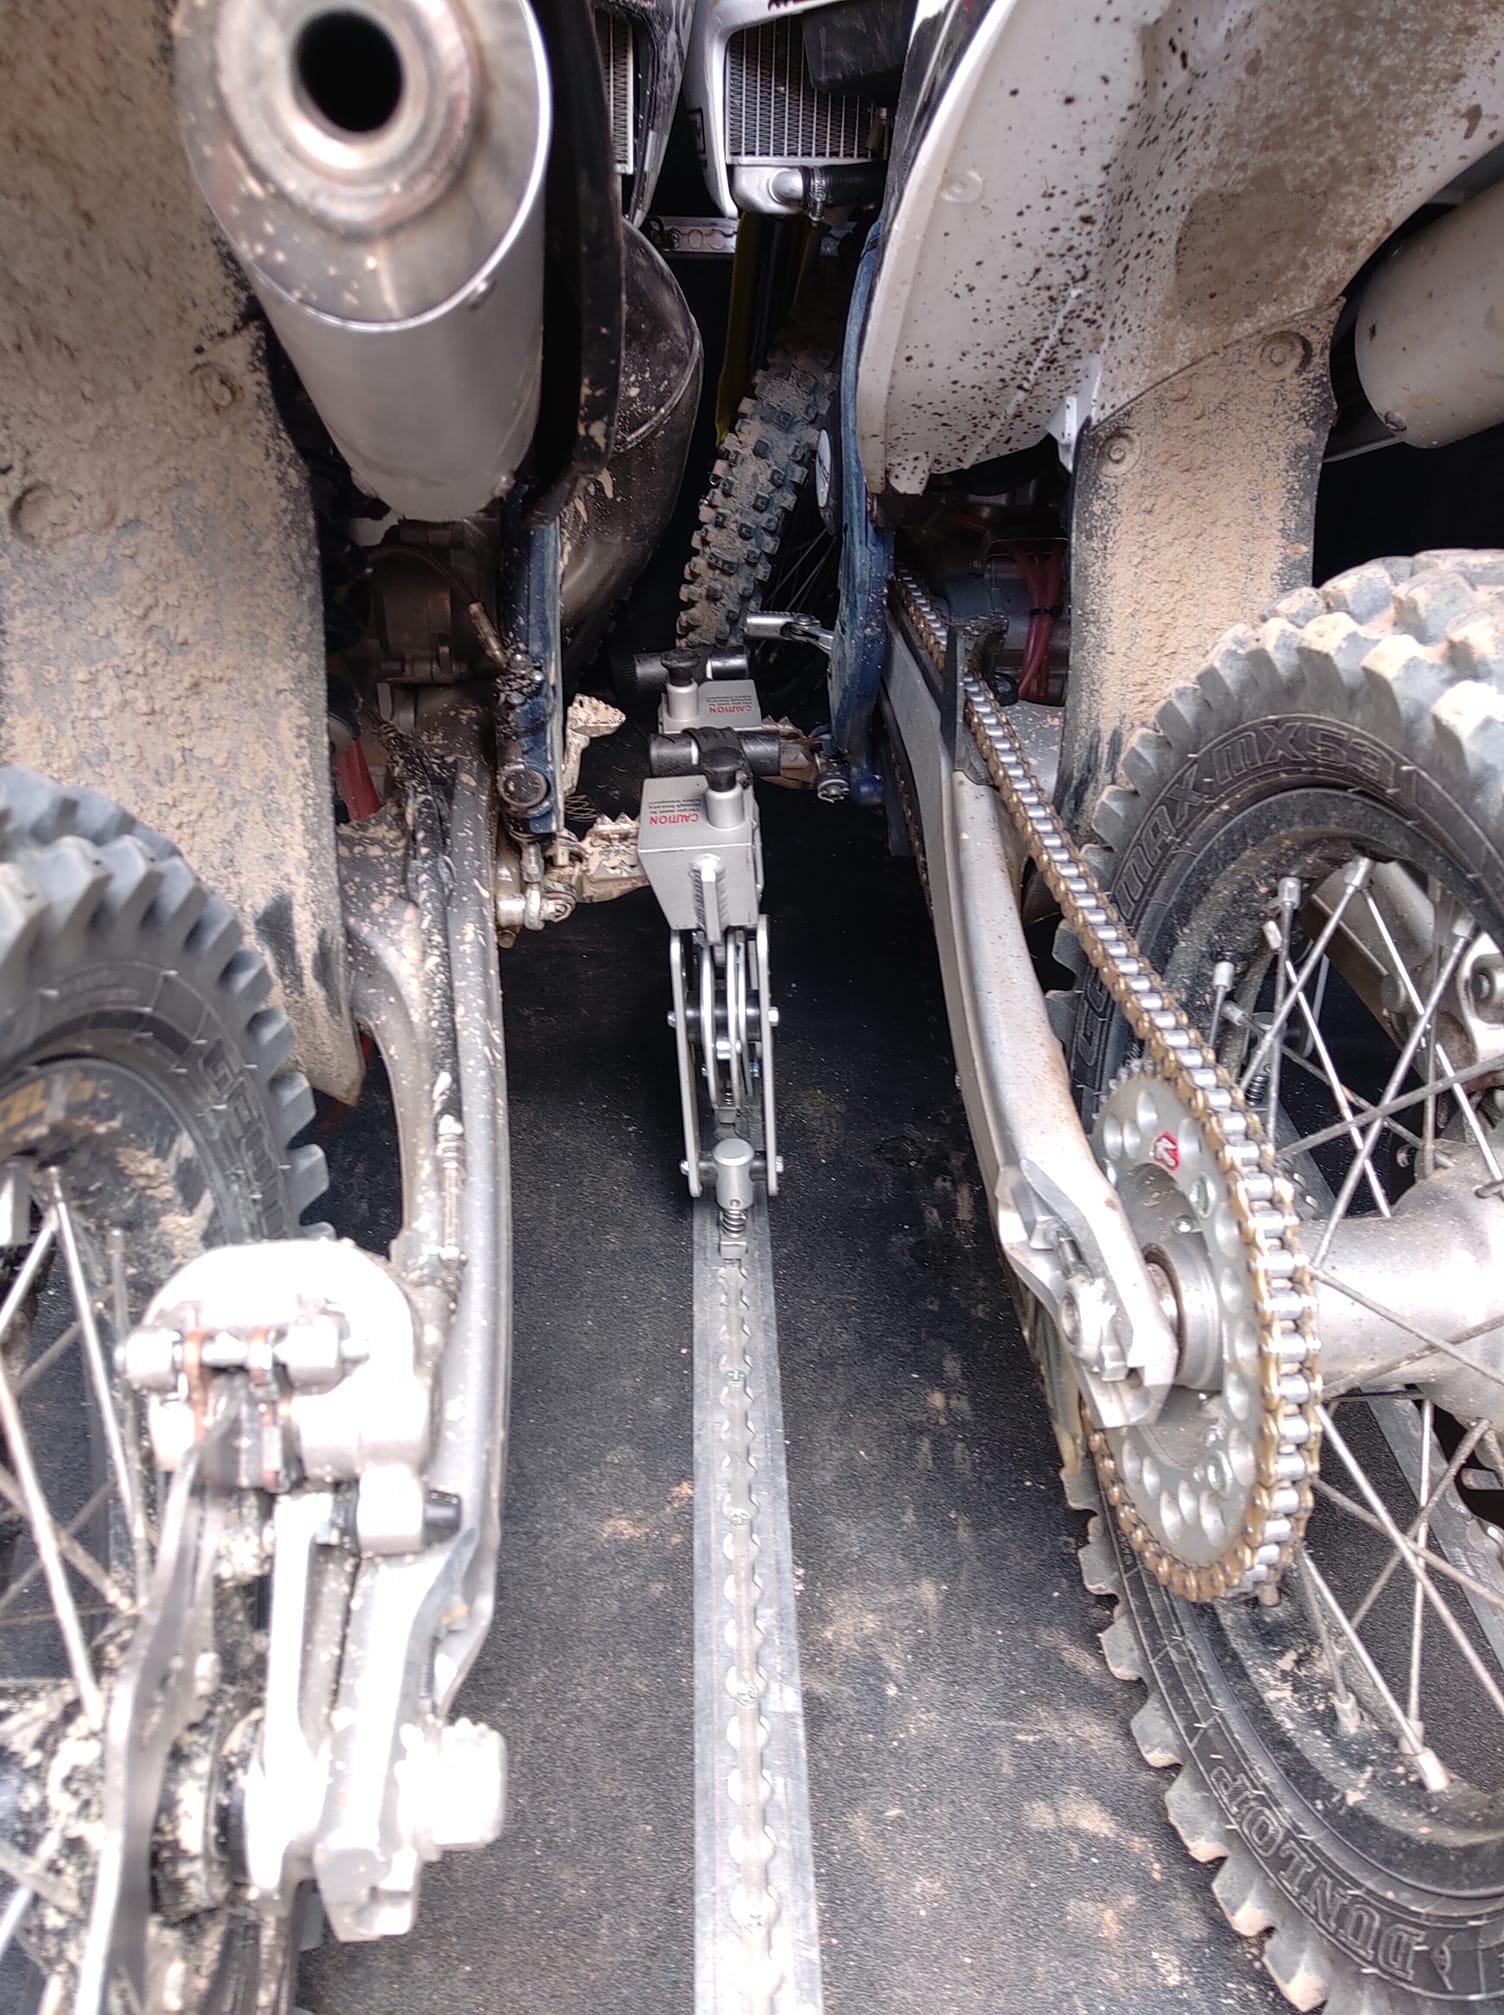 Moto Cinch foot peg tie down system for dirt, street, enduro, adventure and just about any bike made!